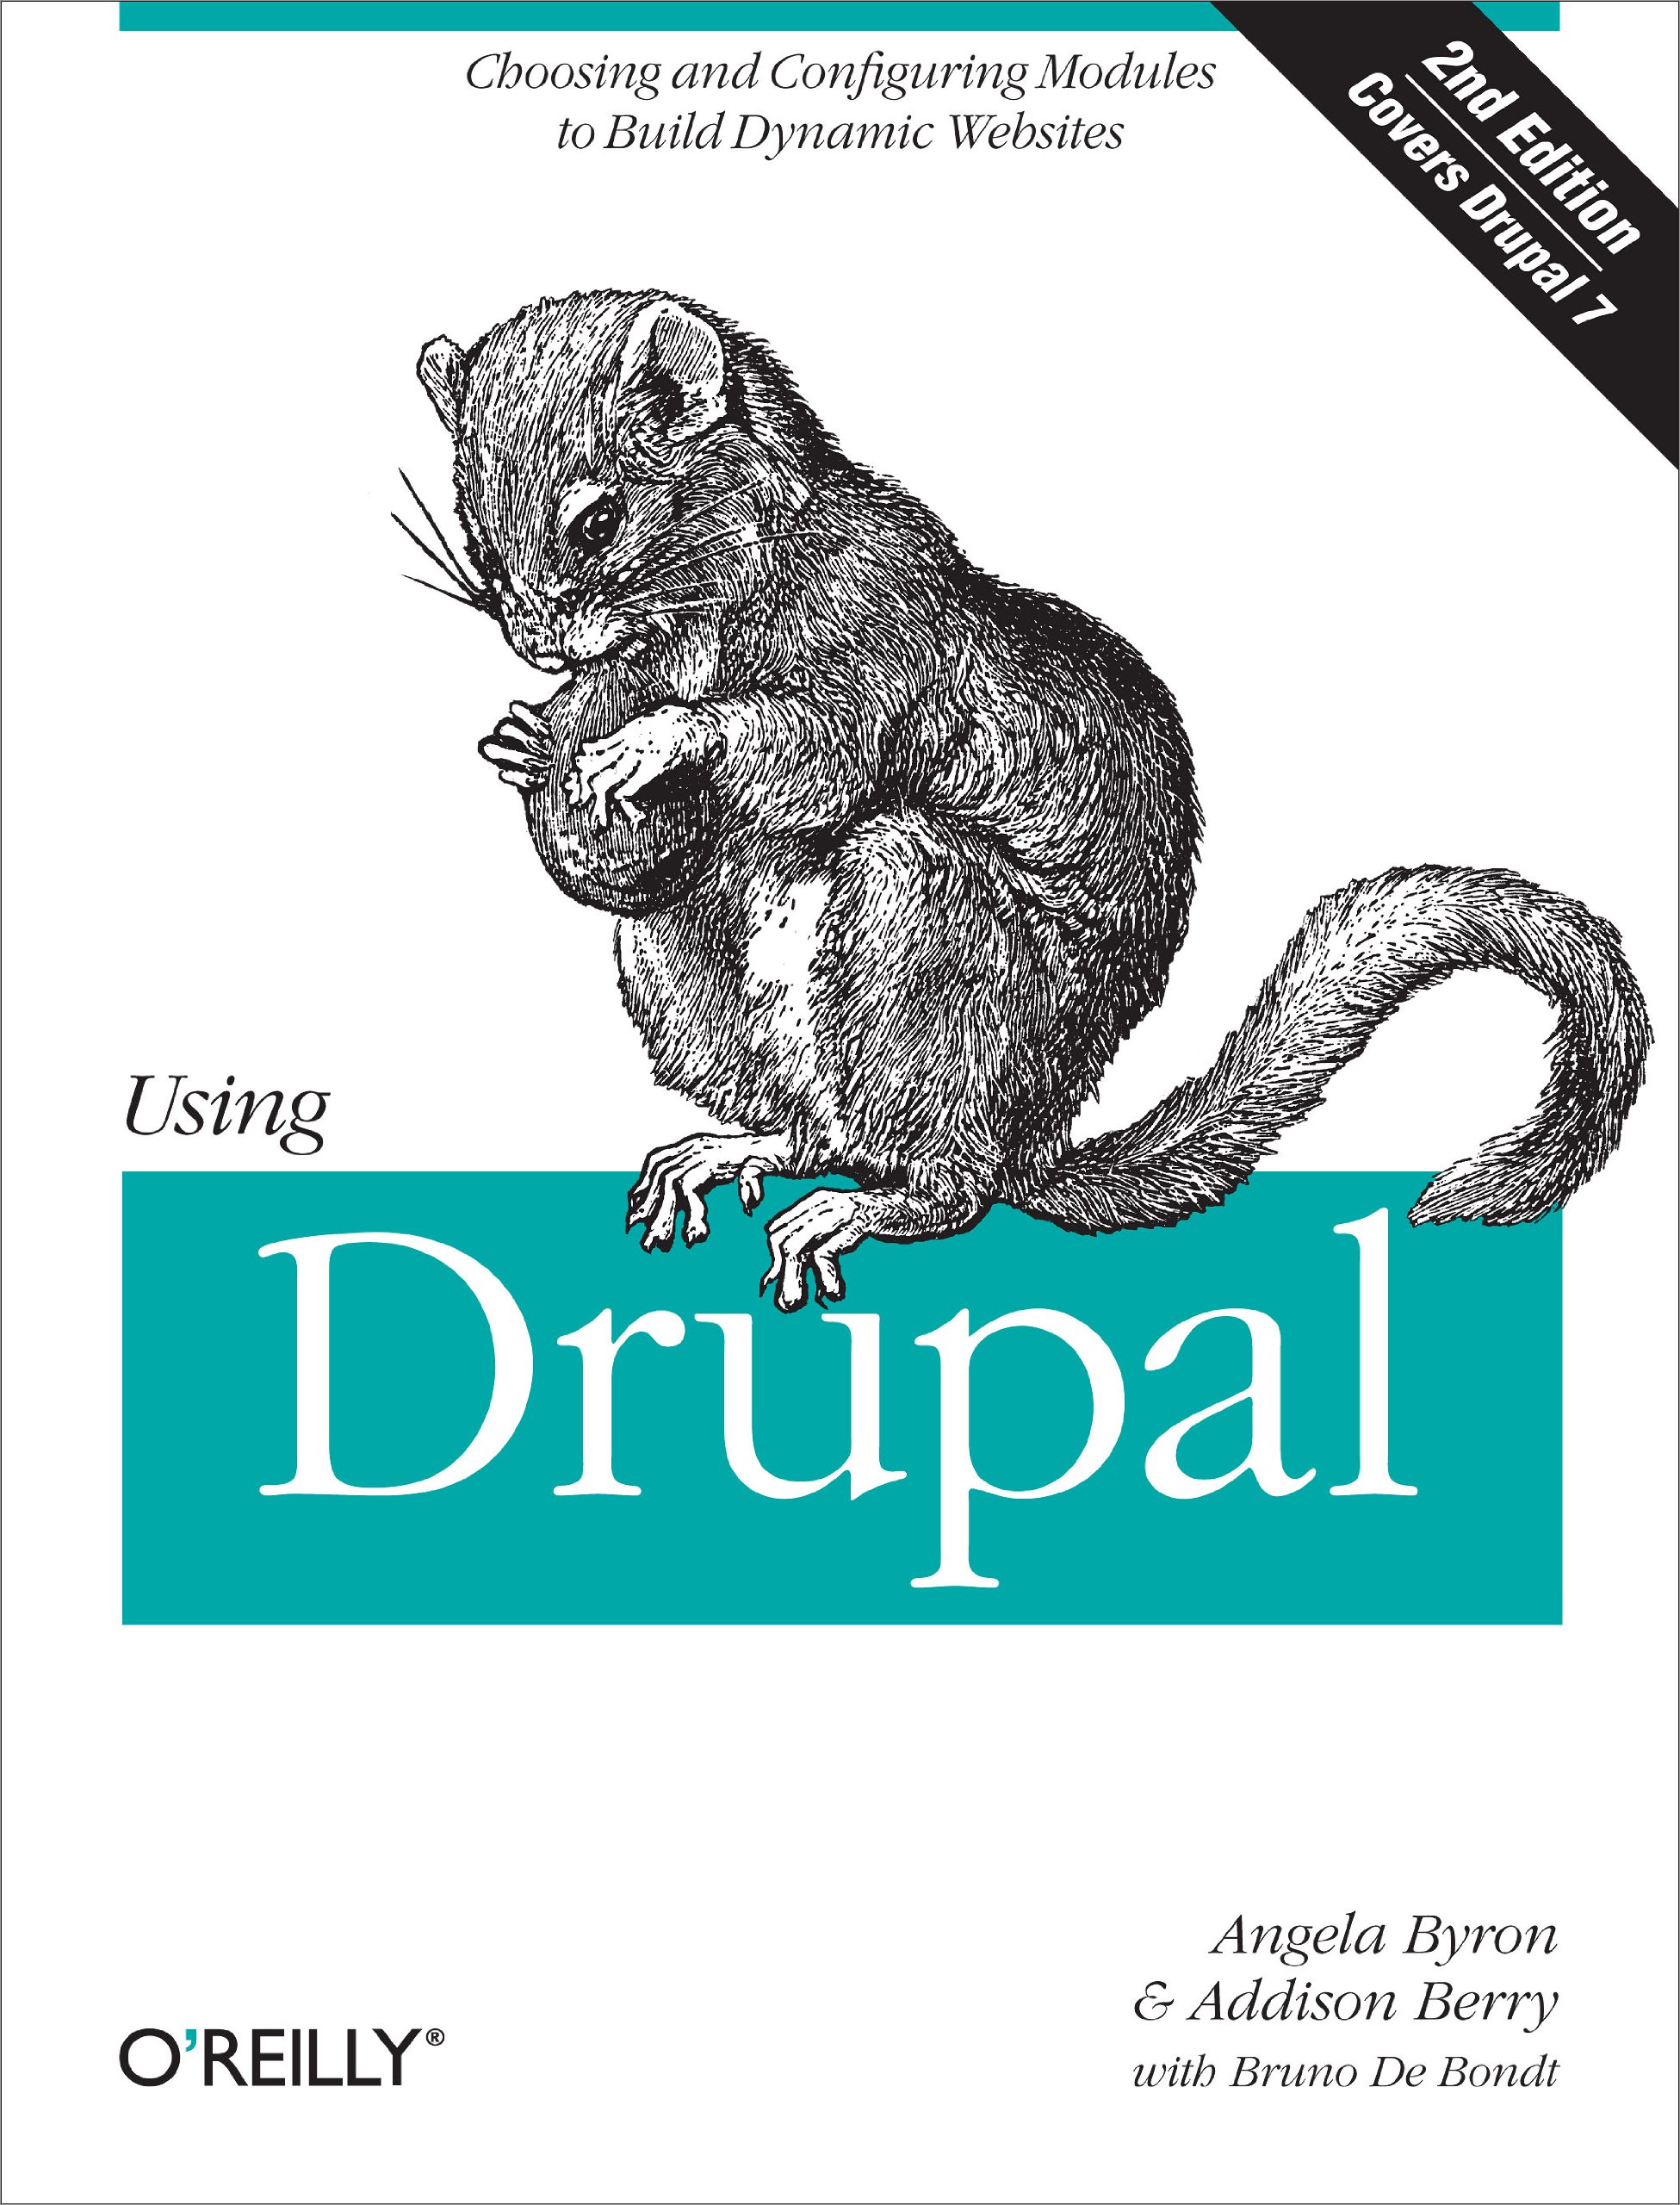 Using Drupal: Choosing and Configuring Modules to Build Dynamic Websites by St?phane Corlosquet